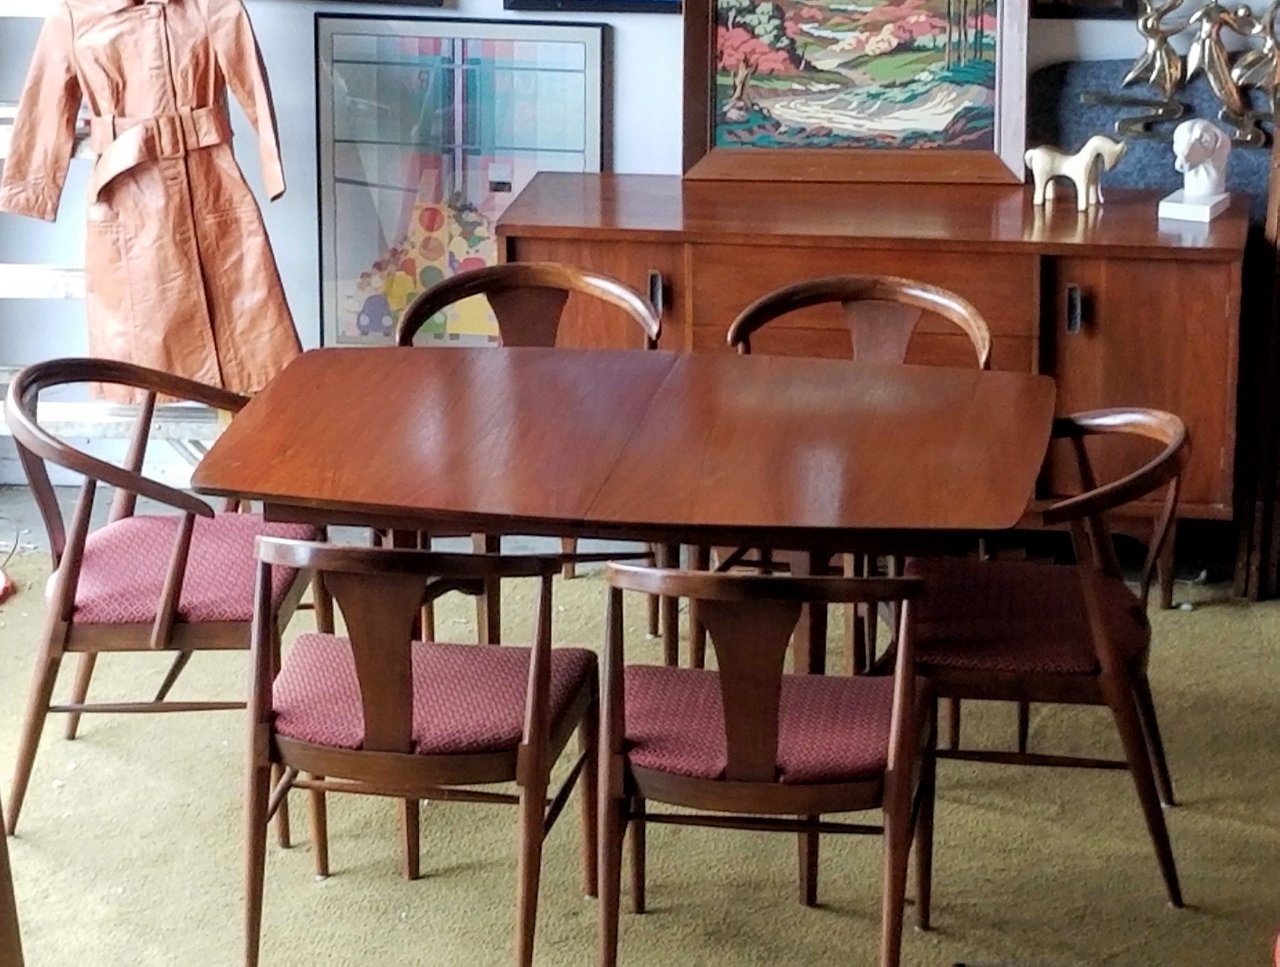 This Is A Blowing Rock Dining Room Set Says 1926,1029 On Chairs My Antique Furniture Collection